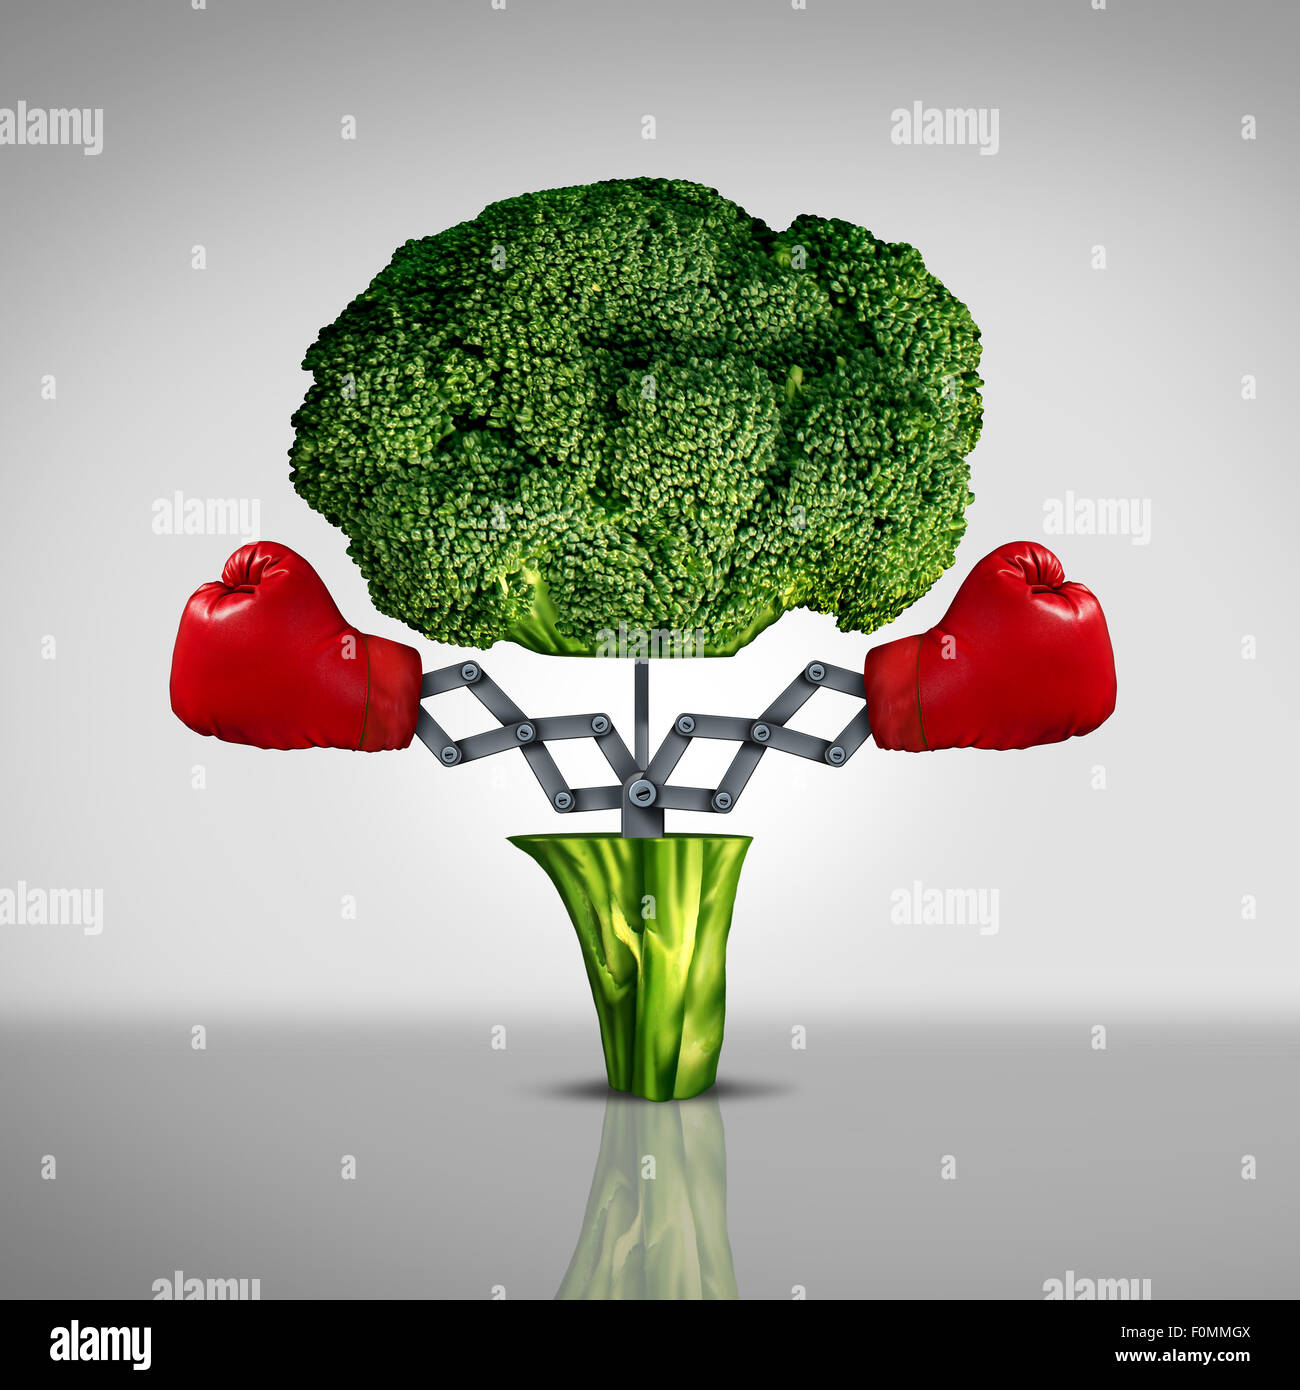 Superfood protection health care concept and cancer disease fighting food symbol as a healthy natural nutrition icon with red boxing gloves emerging out of an open broccoli vegetable as a fitness diet metaphor. Stock Photo